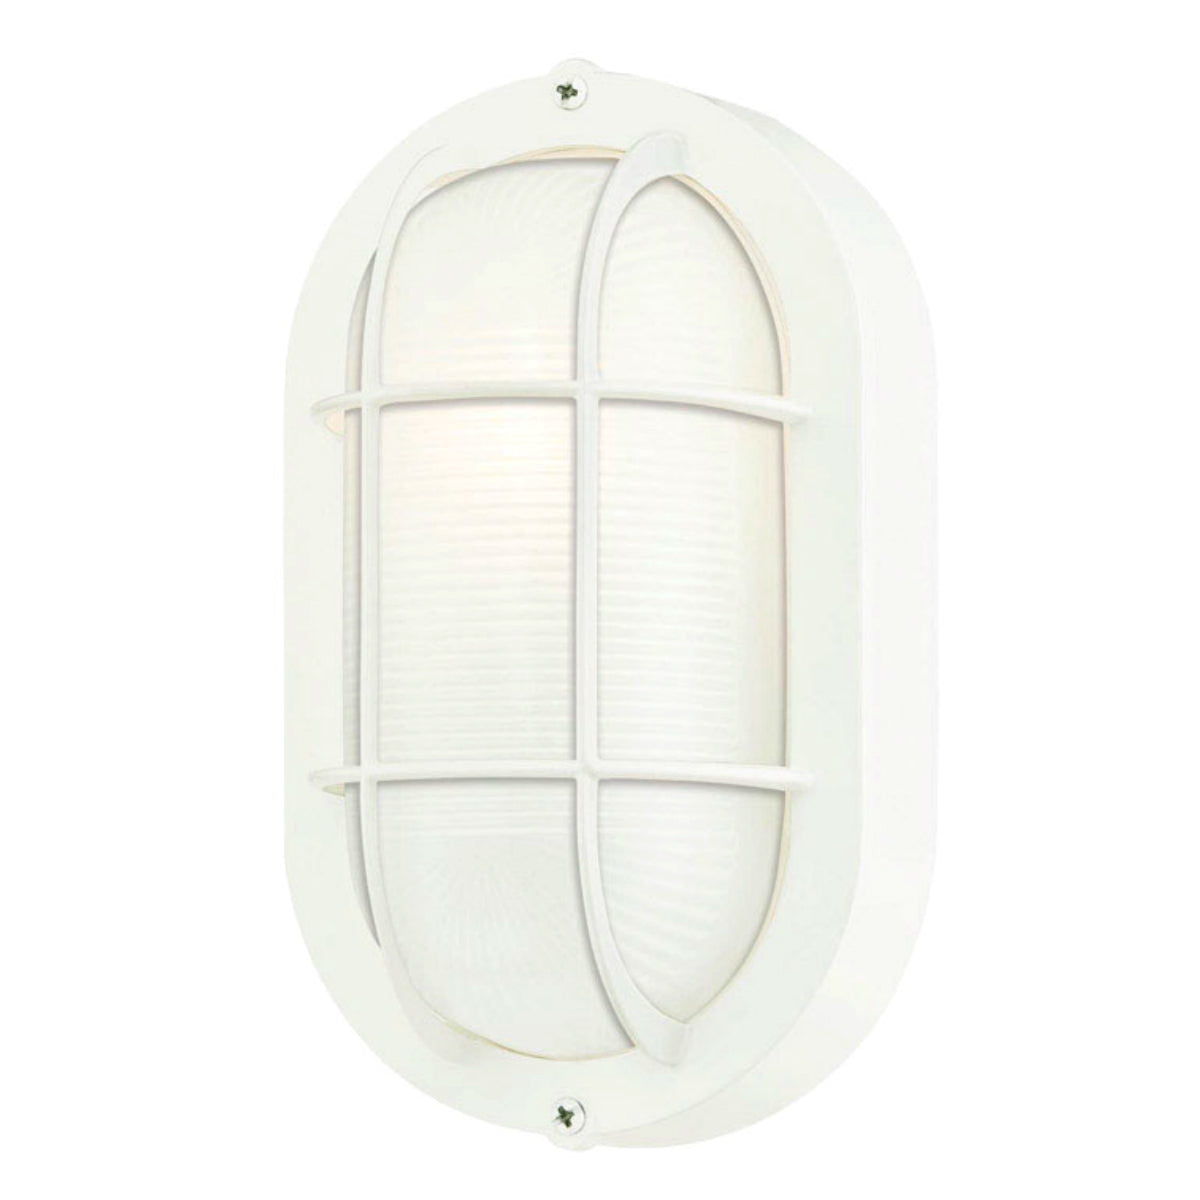 buy wall mount light fixtures at cheap rate in bulk. wholesale & retail lamp parts & accessories store. home décor ideas, maintenance, repair replacement parts